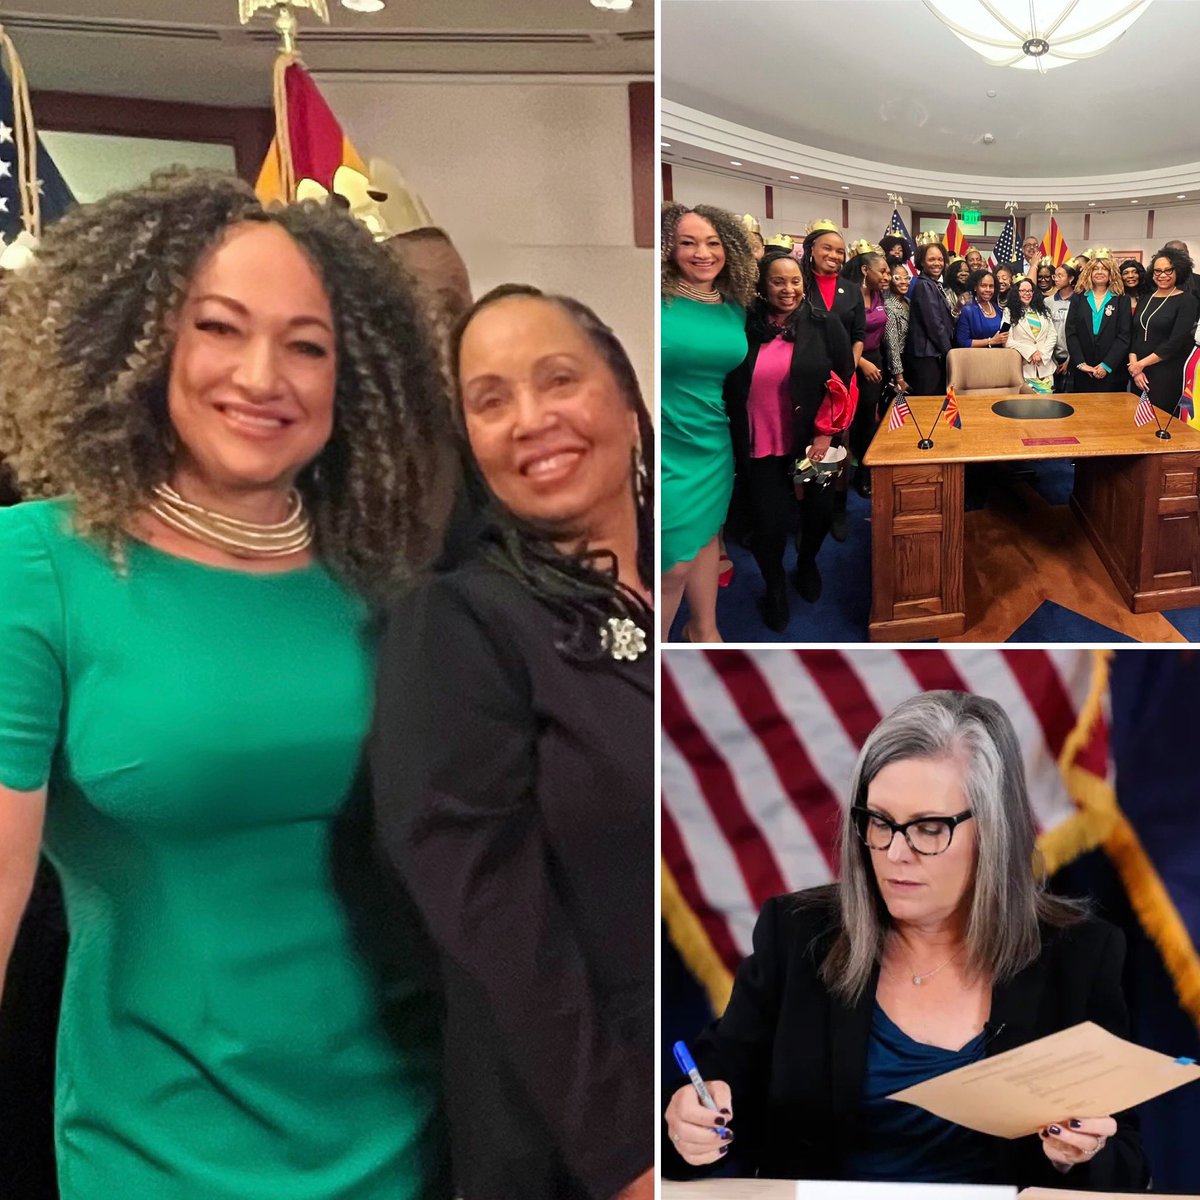 Today, AZ Gov Hobbs signed The CROWN Act. Great job, Arizona, AAMSAZ, & everyone who has fought to get this passed. CROWN stands for Creating a Respectful and Open World for Natural hair. This legislation seeks to end centuries of hair discrimination across the U.S. #CROWNAct